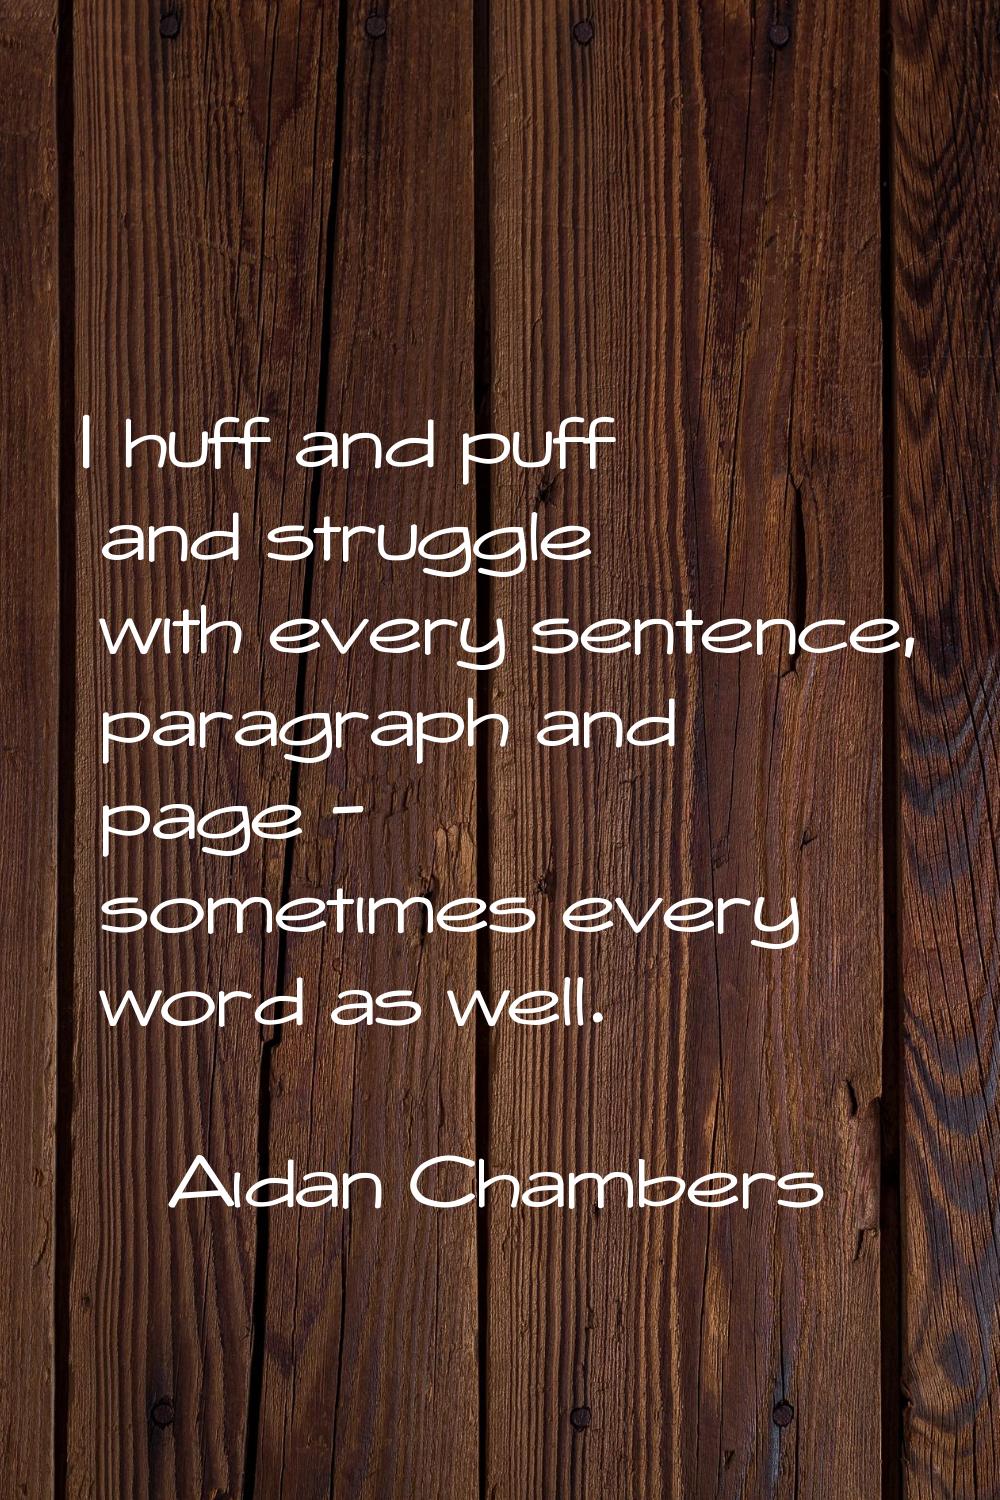 I huff and puff and struggle with every sentence, paragraph and page - sometimes every word as well